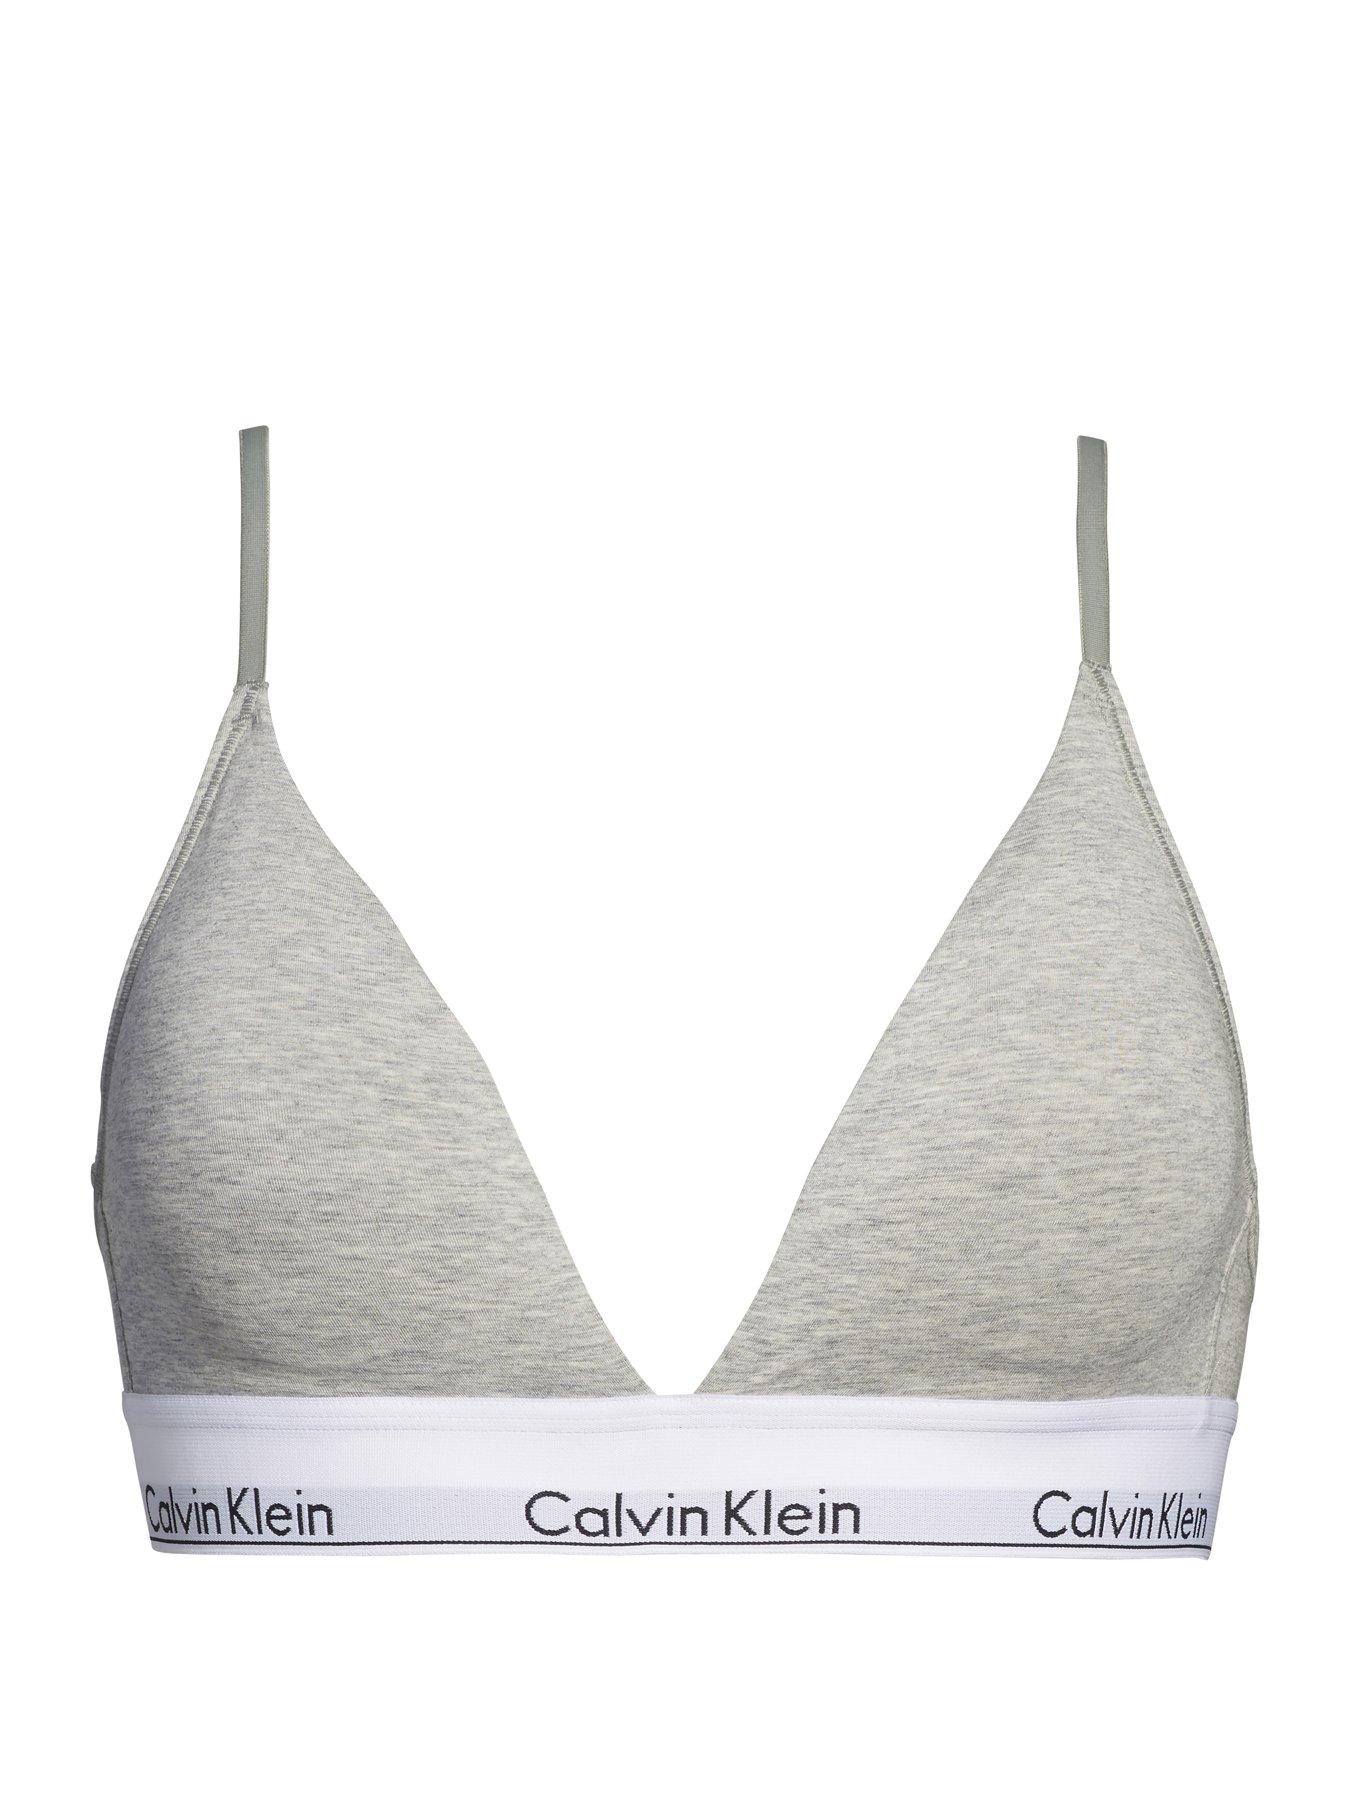 49% OFF on Calvin Klein Women's Invisibles Lightly Lined T-Shirt Bra on